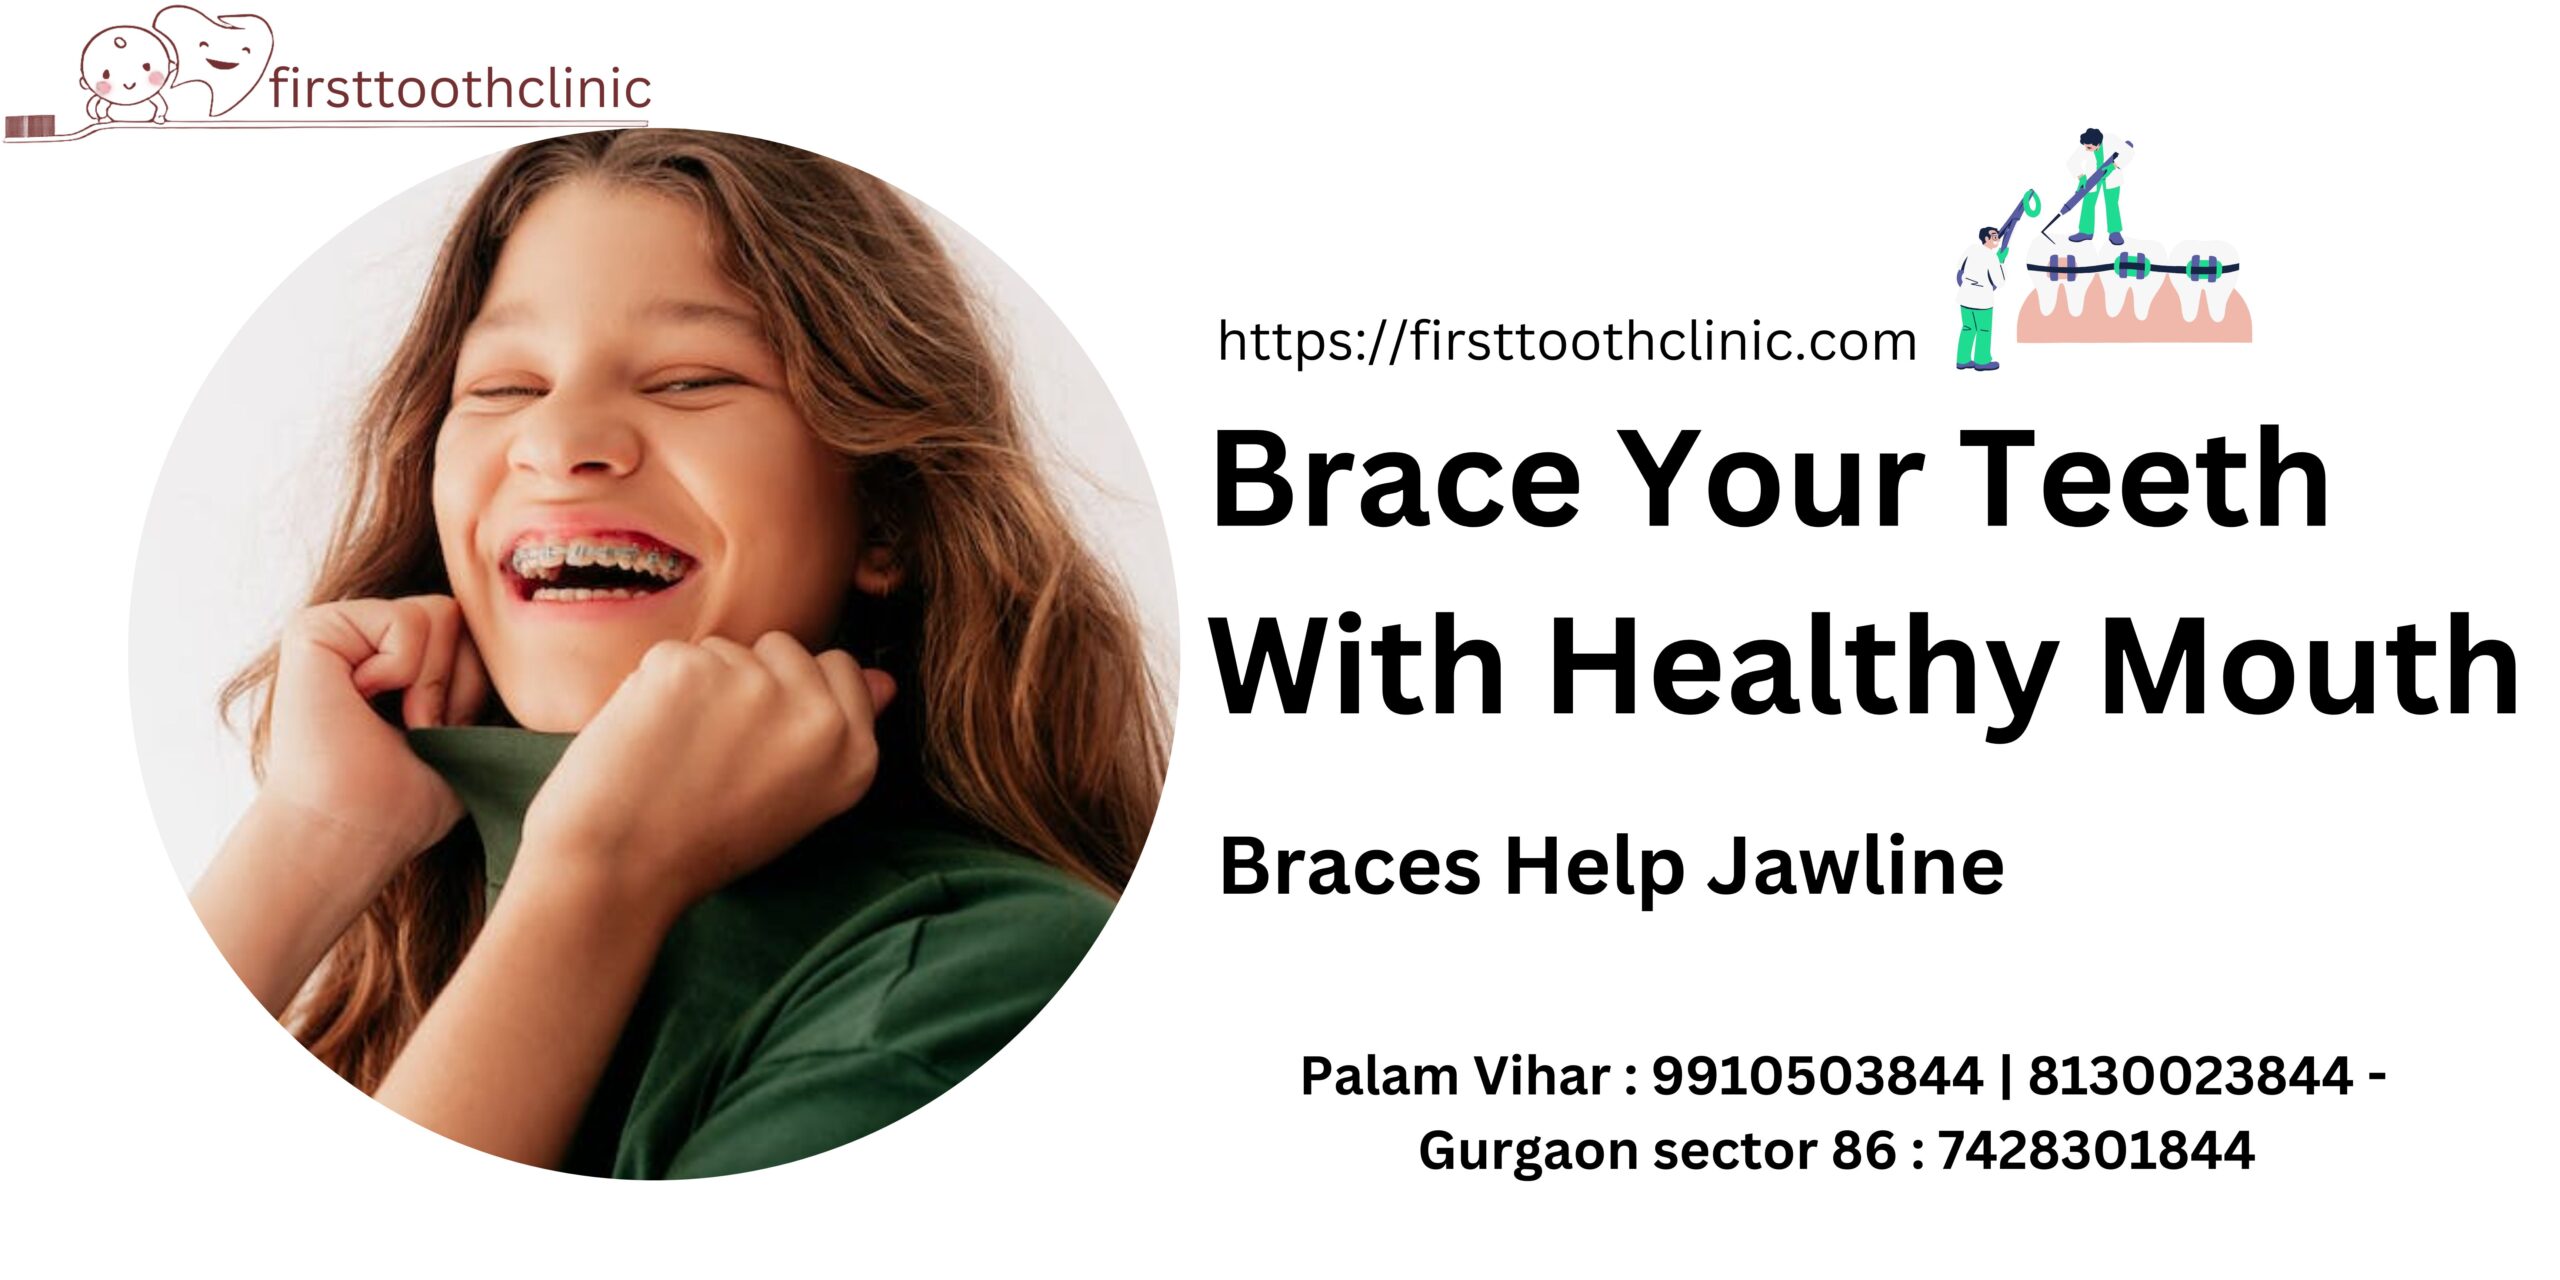 Brace Your Teeth With Healthy Mouth -Braces Help Jawline-best dental clinic in Gurgaon- Firsttoothclinic